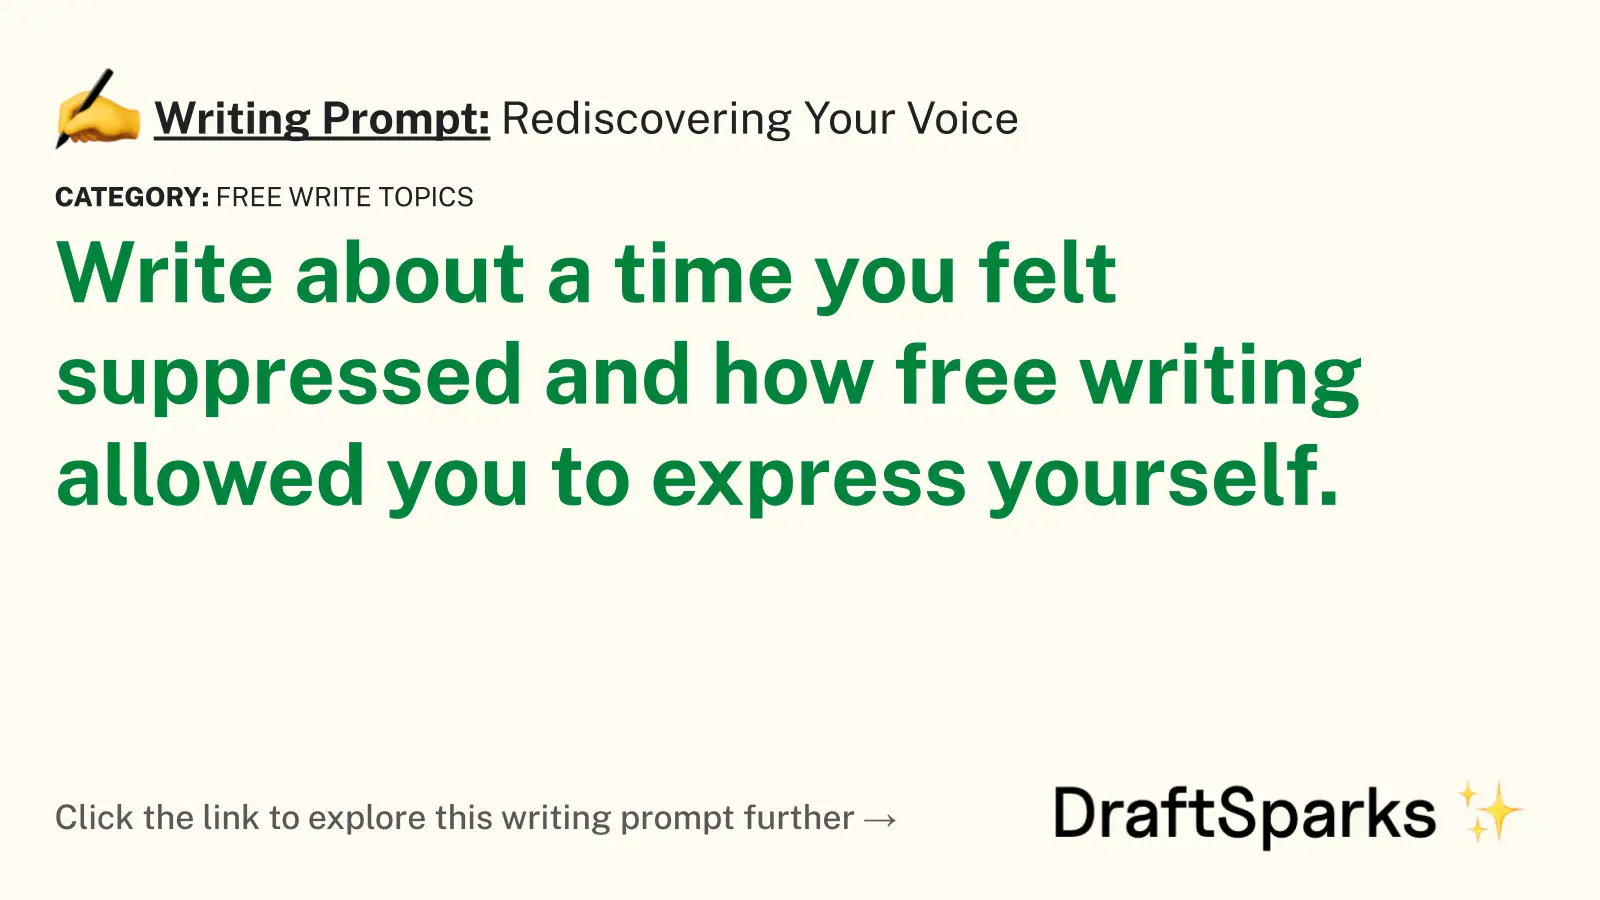 Rediscovering Your Voice